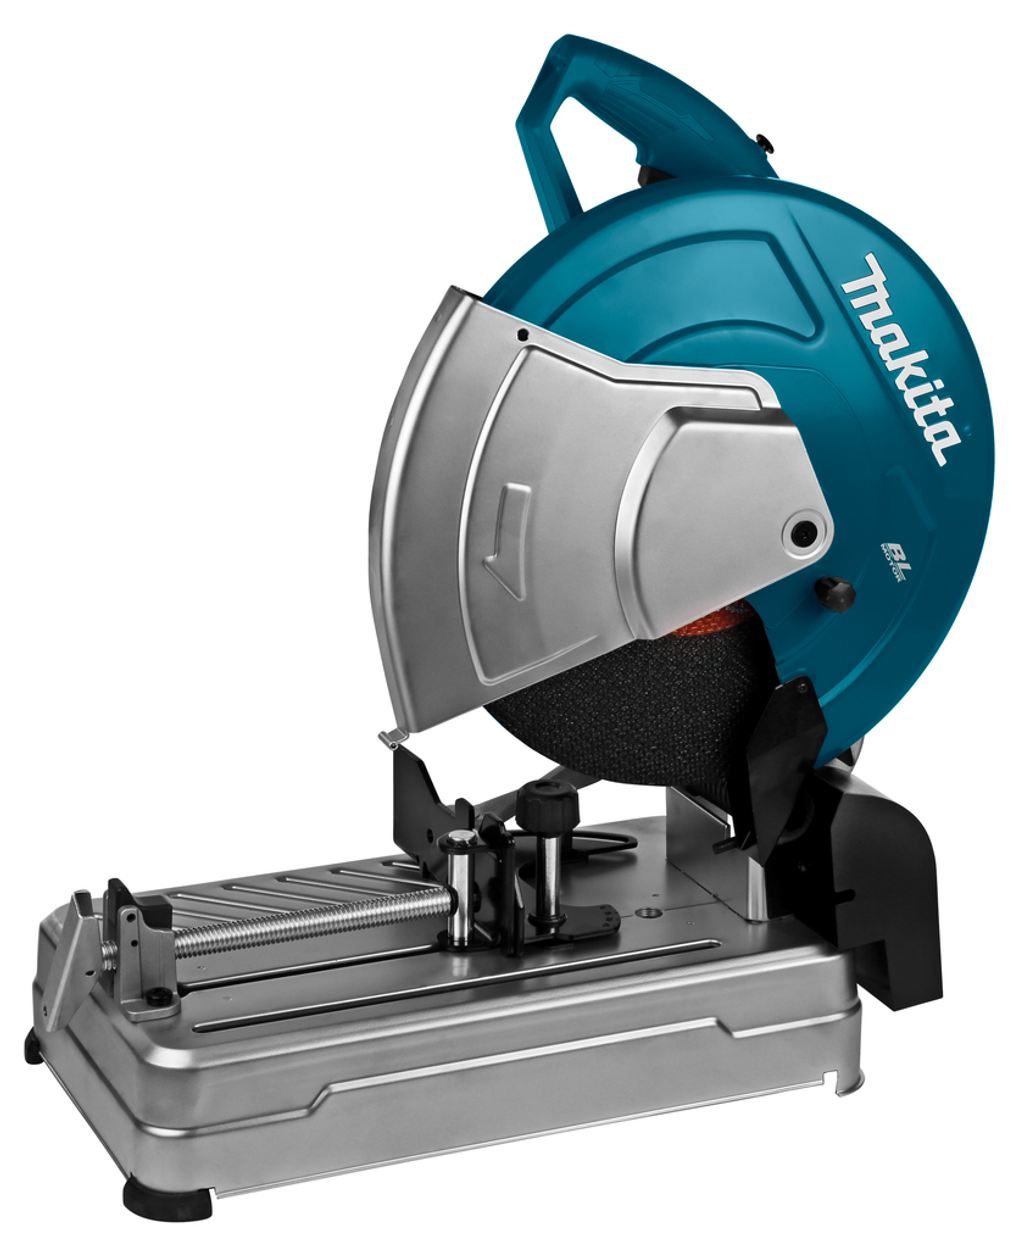 Rent the Makita brushless cordless cut-off saw for quick sawing at 90 degree angles and for cutting of metal profiles